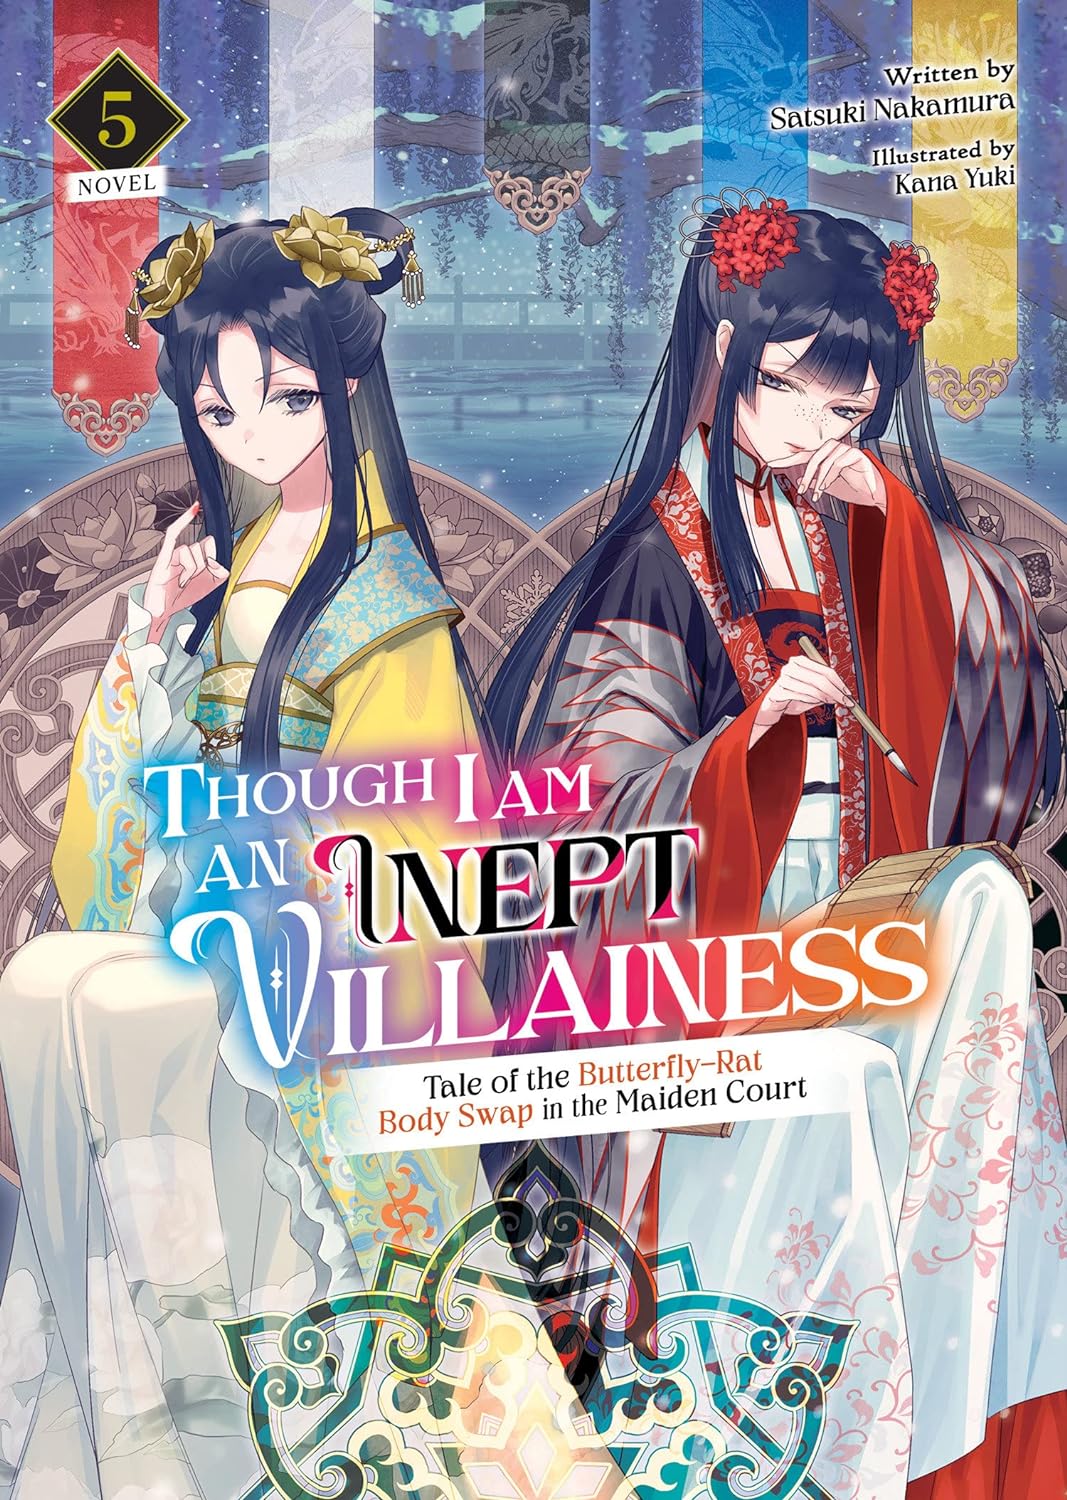 Though I Am an Inept Villainess: Tale of the Butterfly-Rat Body Swap in the Maiden Court (Light Novel) Vol. 05